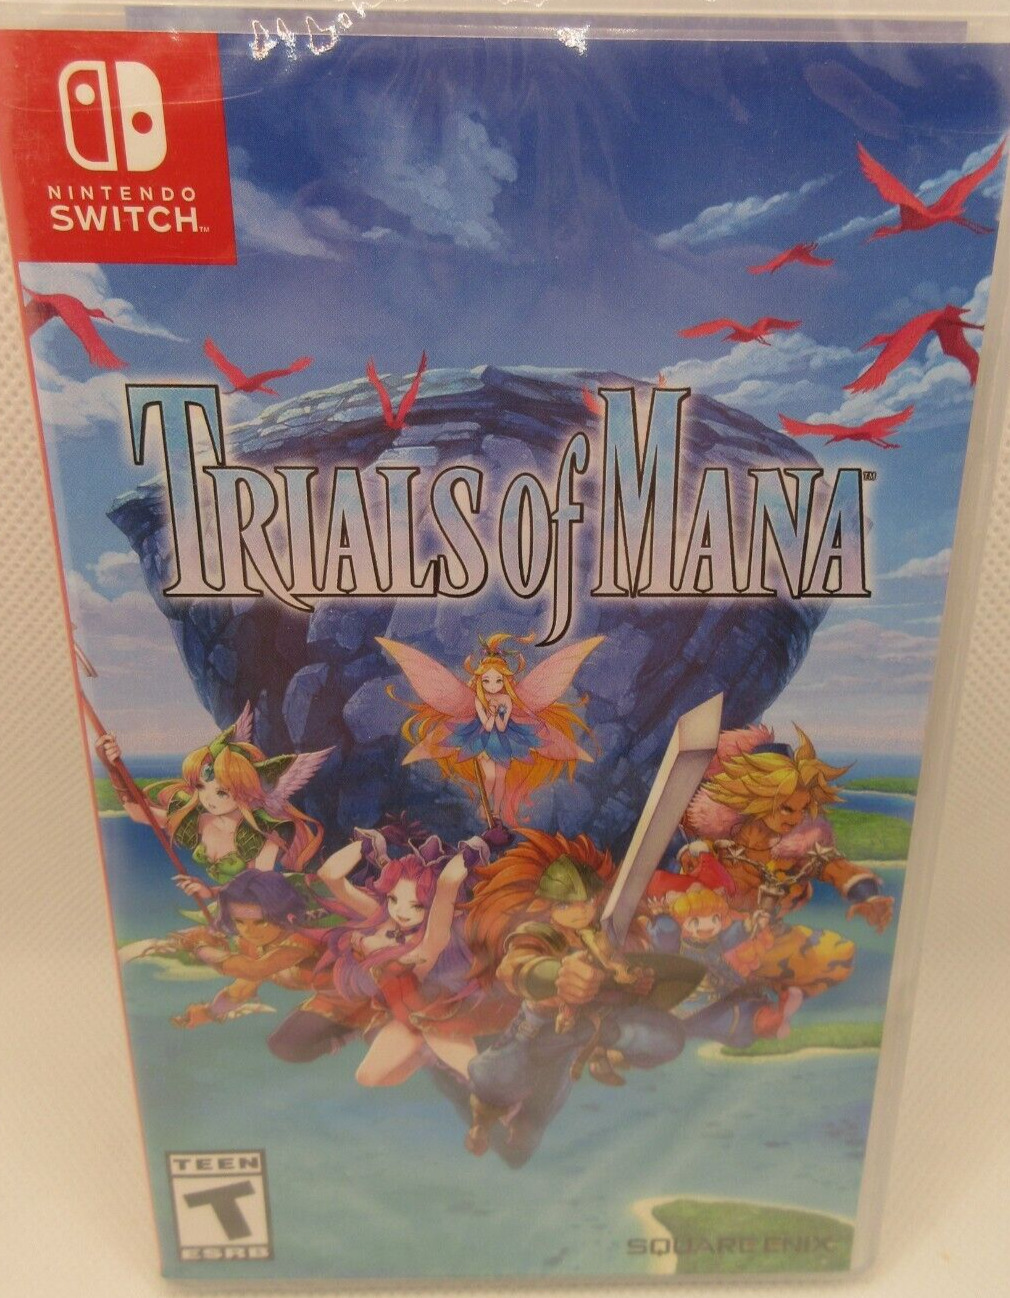 Trials of Mana Nintendo Switch Square Enix 92346 New Old Stock Sealed Ships Free